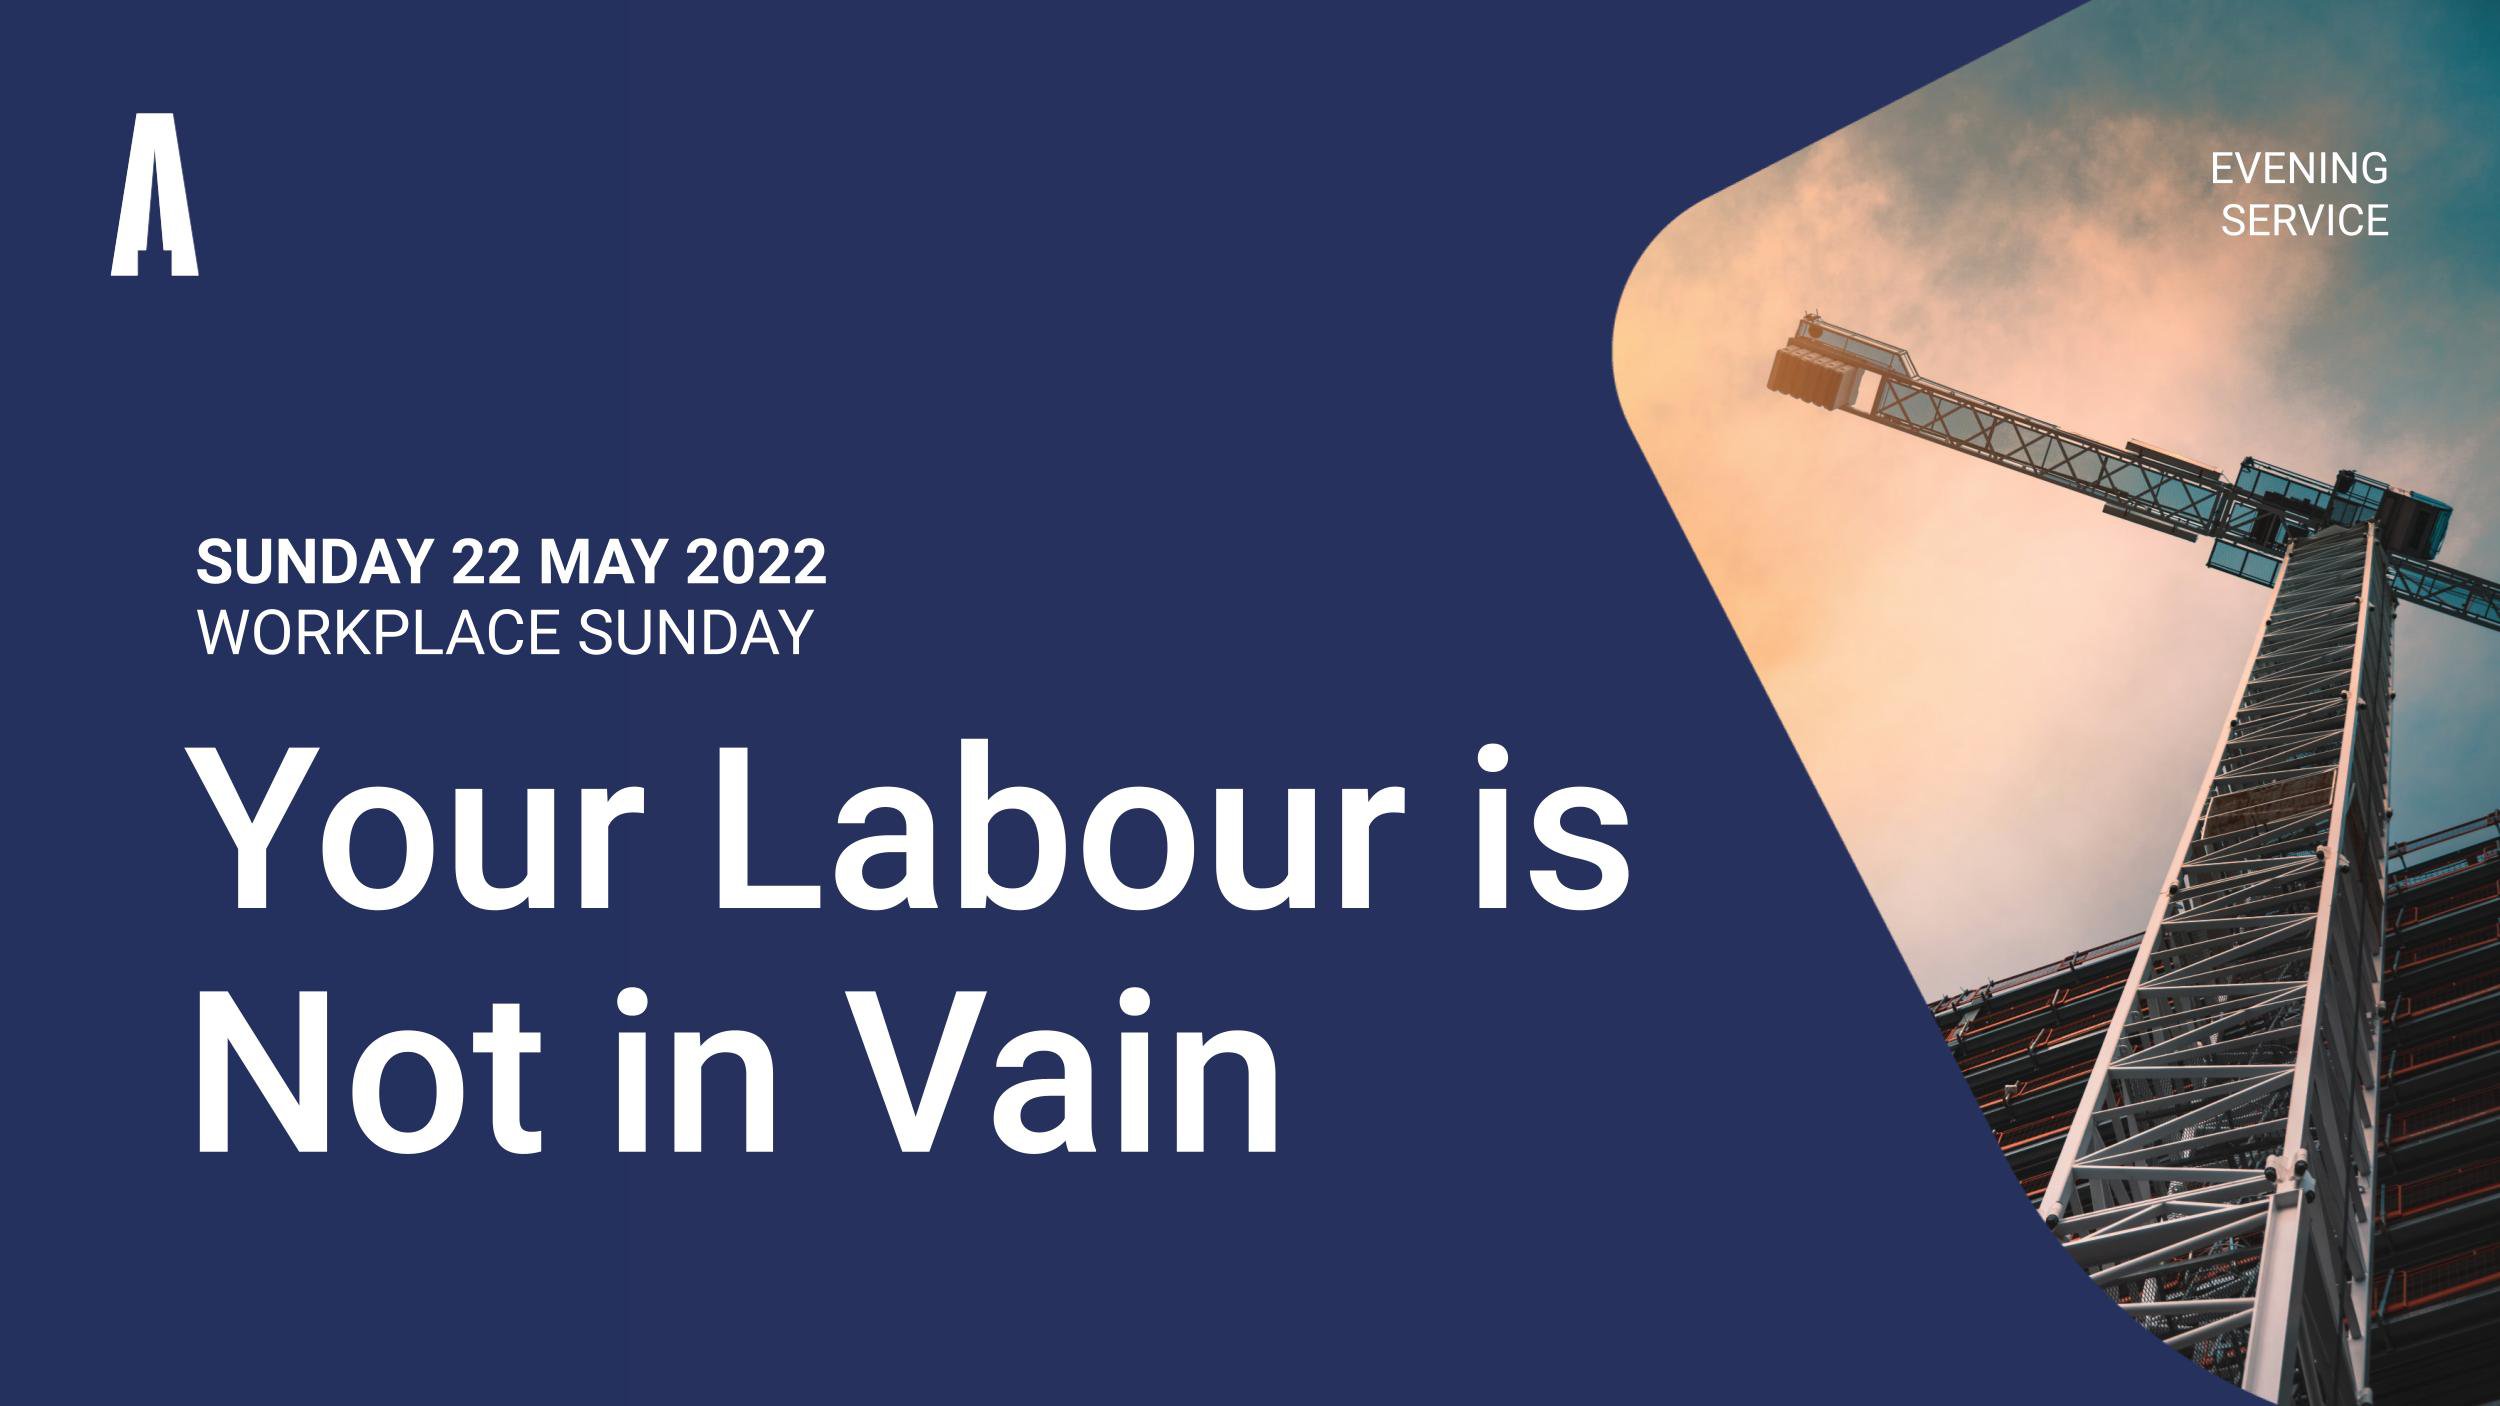 Your Labour is Not in Vain